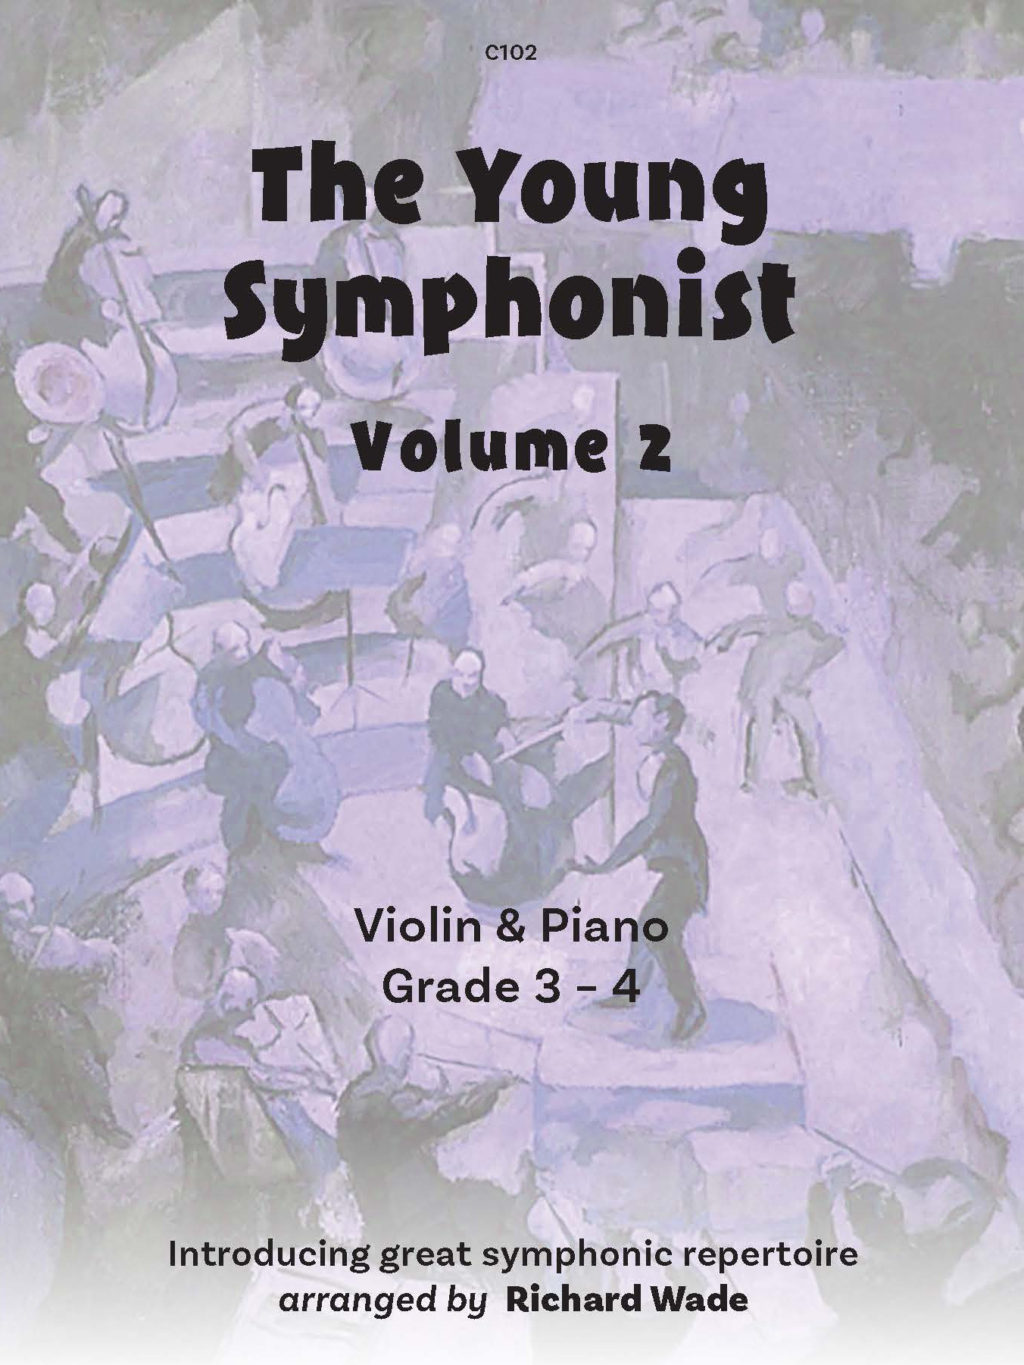 Young Symphonist Vol 2 Wade Violin & Piano Sheet Music Songbook